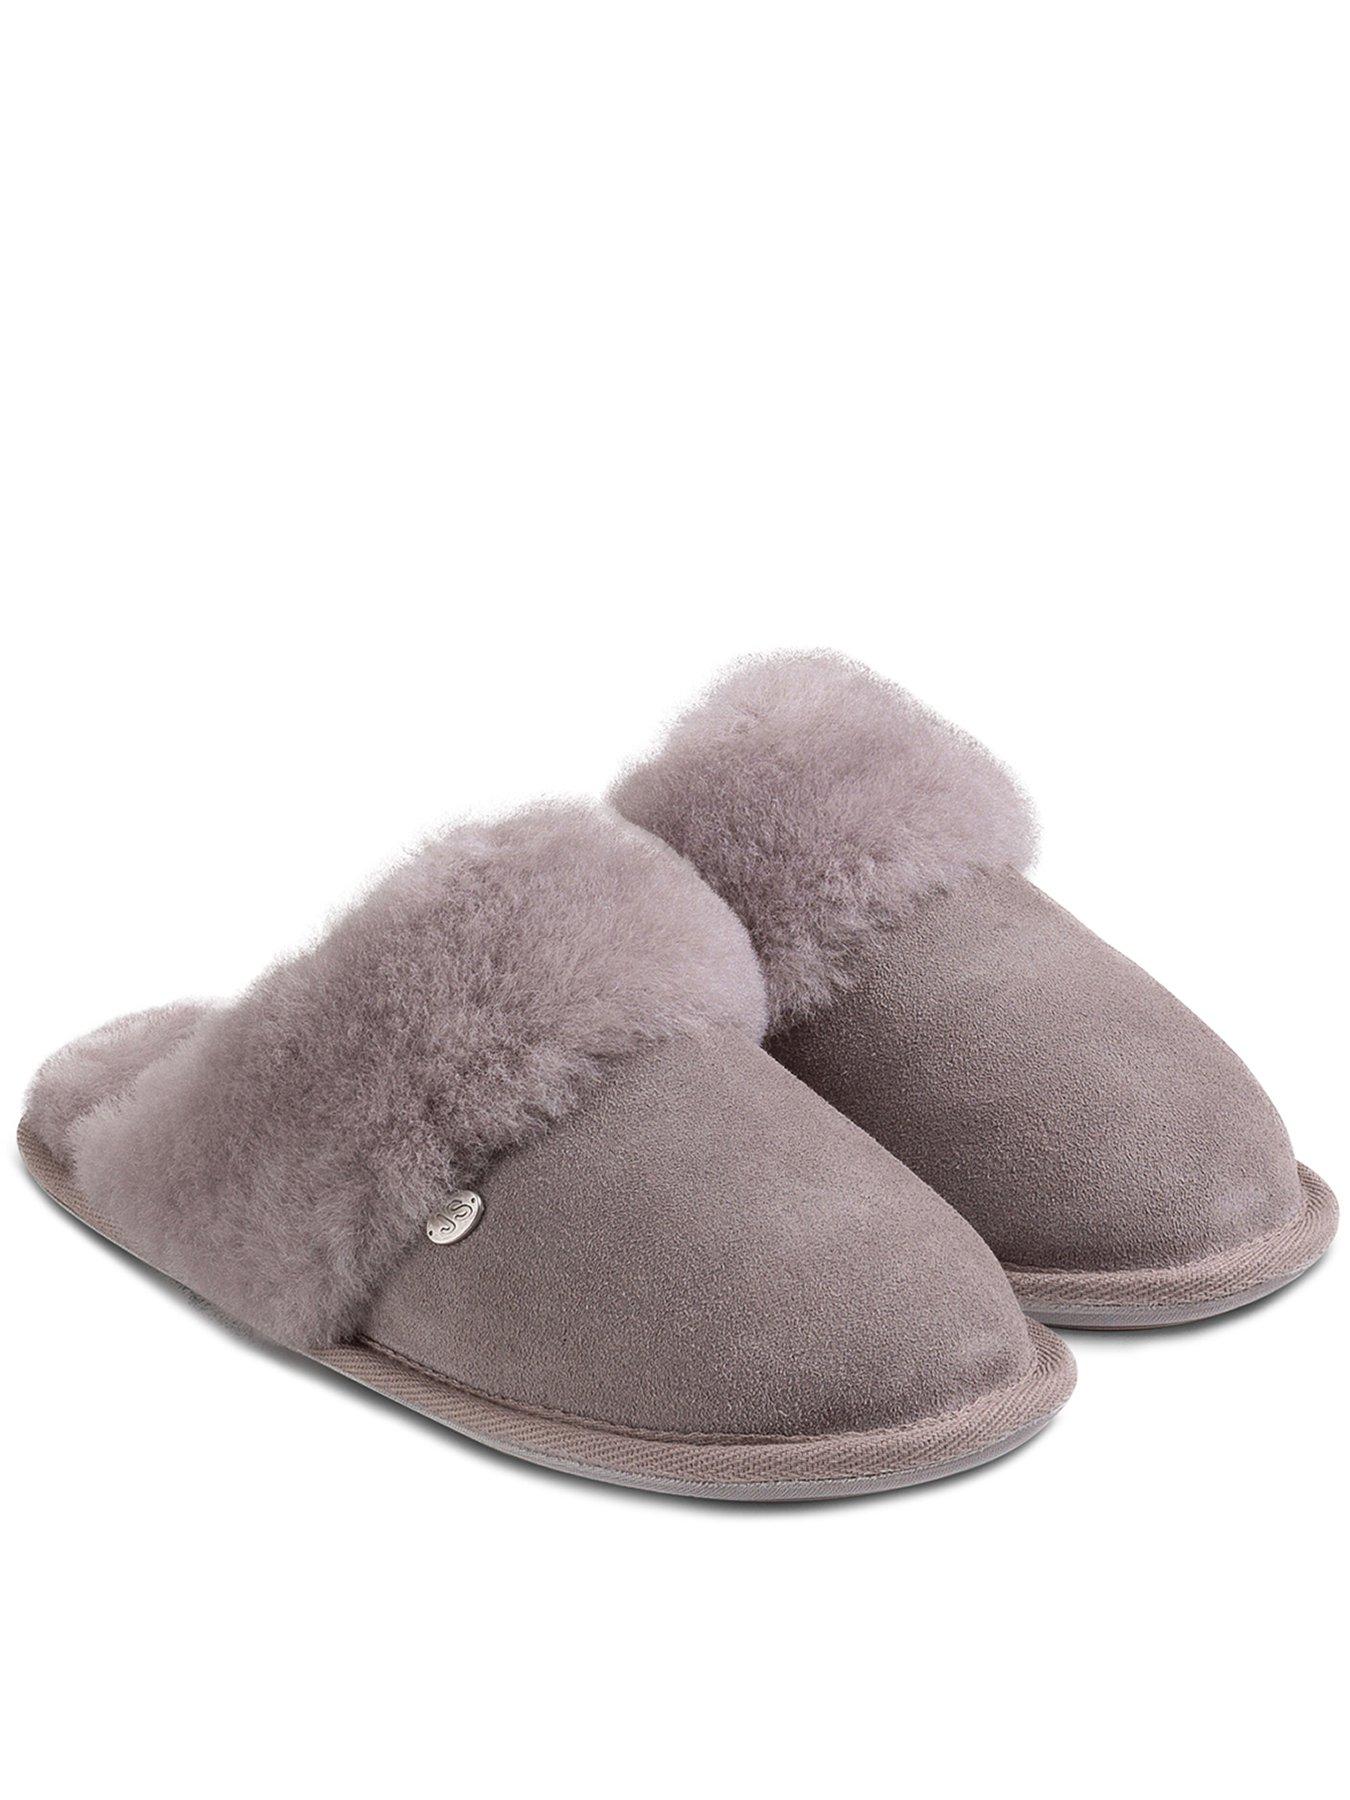 Buy HomyWolf Womens Slippers Fluffy House Slippers Warm Indoor Outdoor  Slipper For Winter at Amazon.in